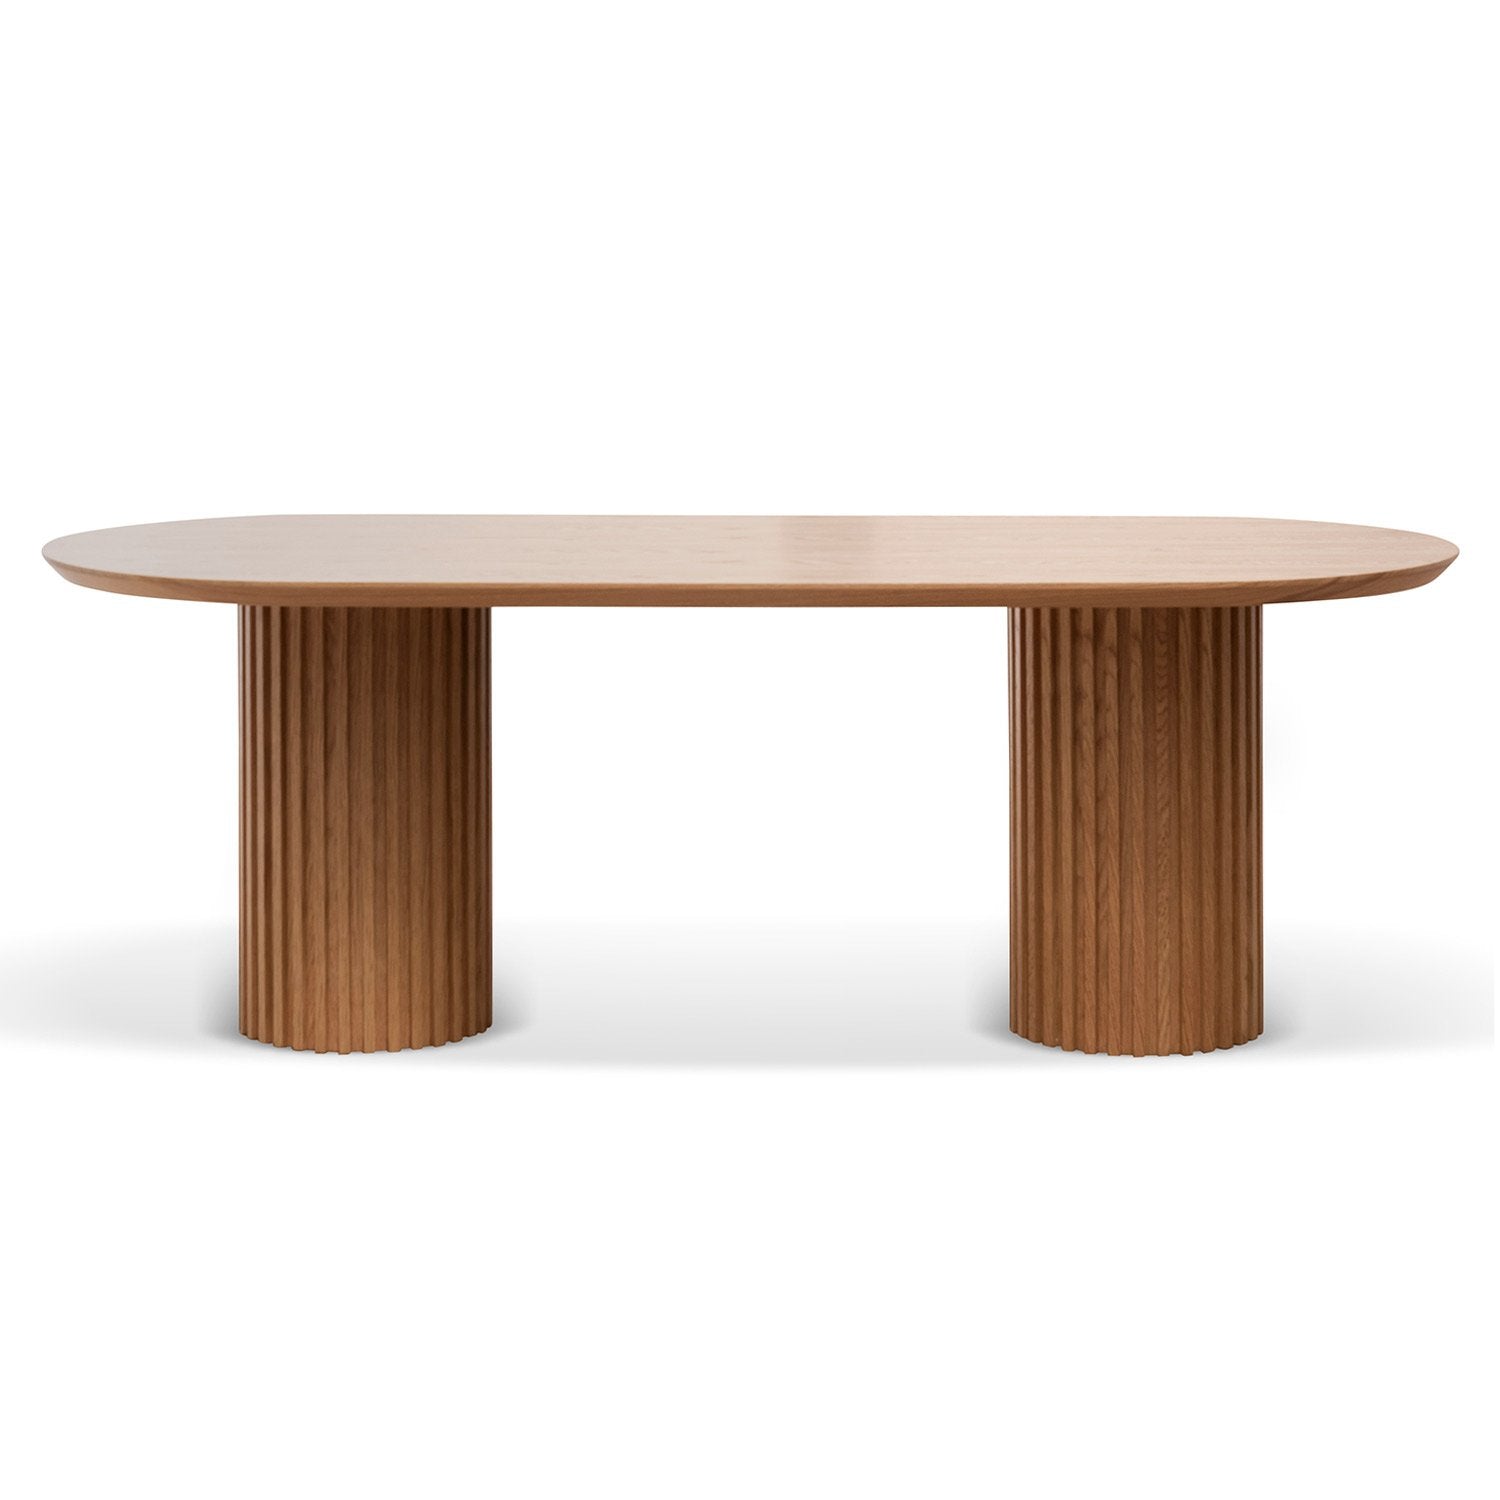 Vics 2.2m Wooden Dining Table - Natural - Dining Tables